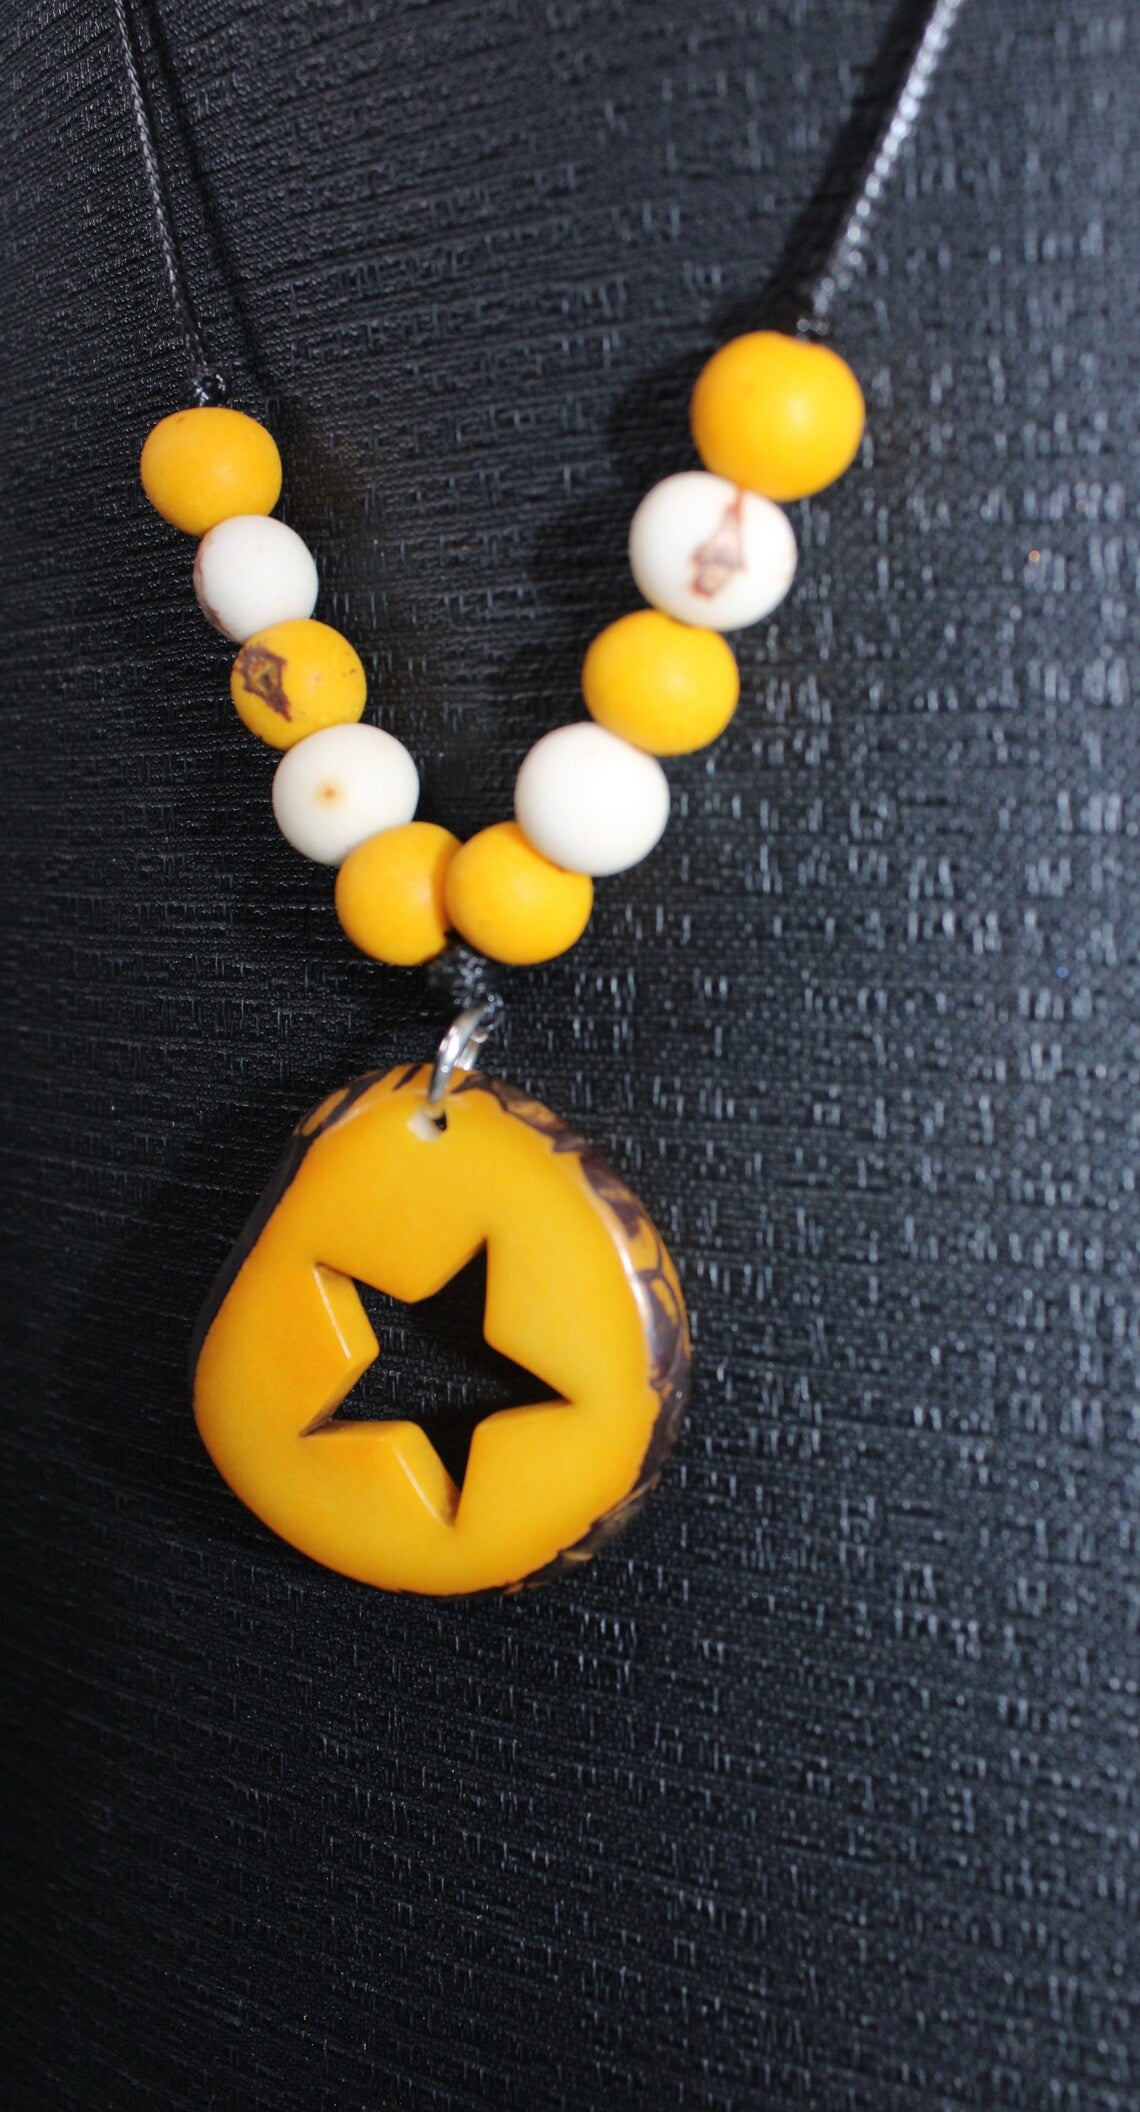 Tagua Pendant Necklace and Earrings Star Cut Set in Yellow Color.